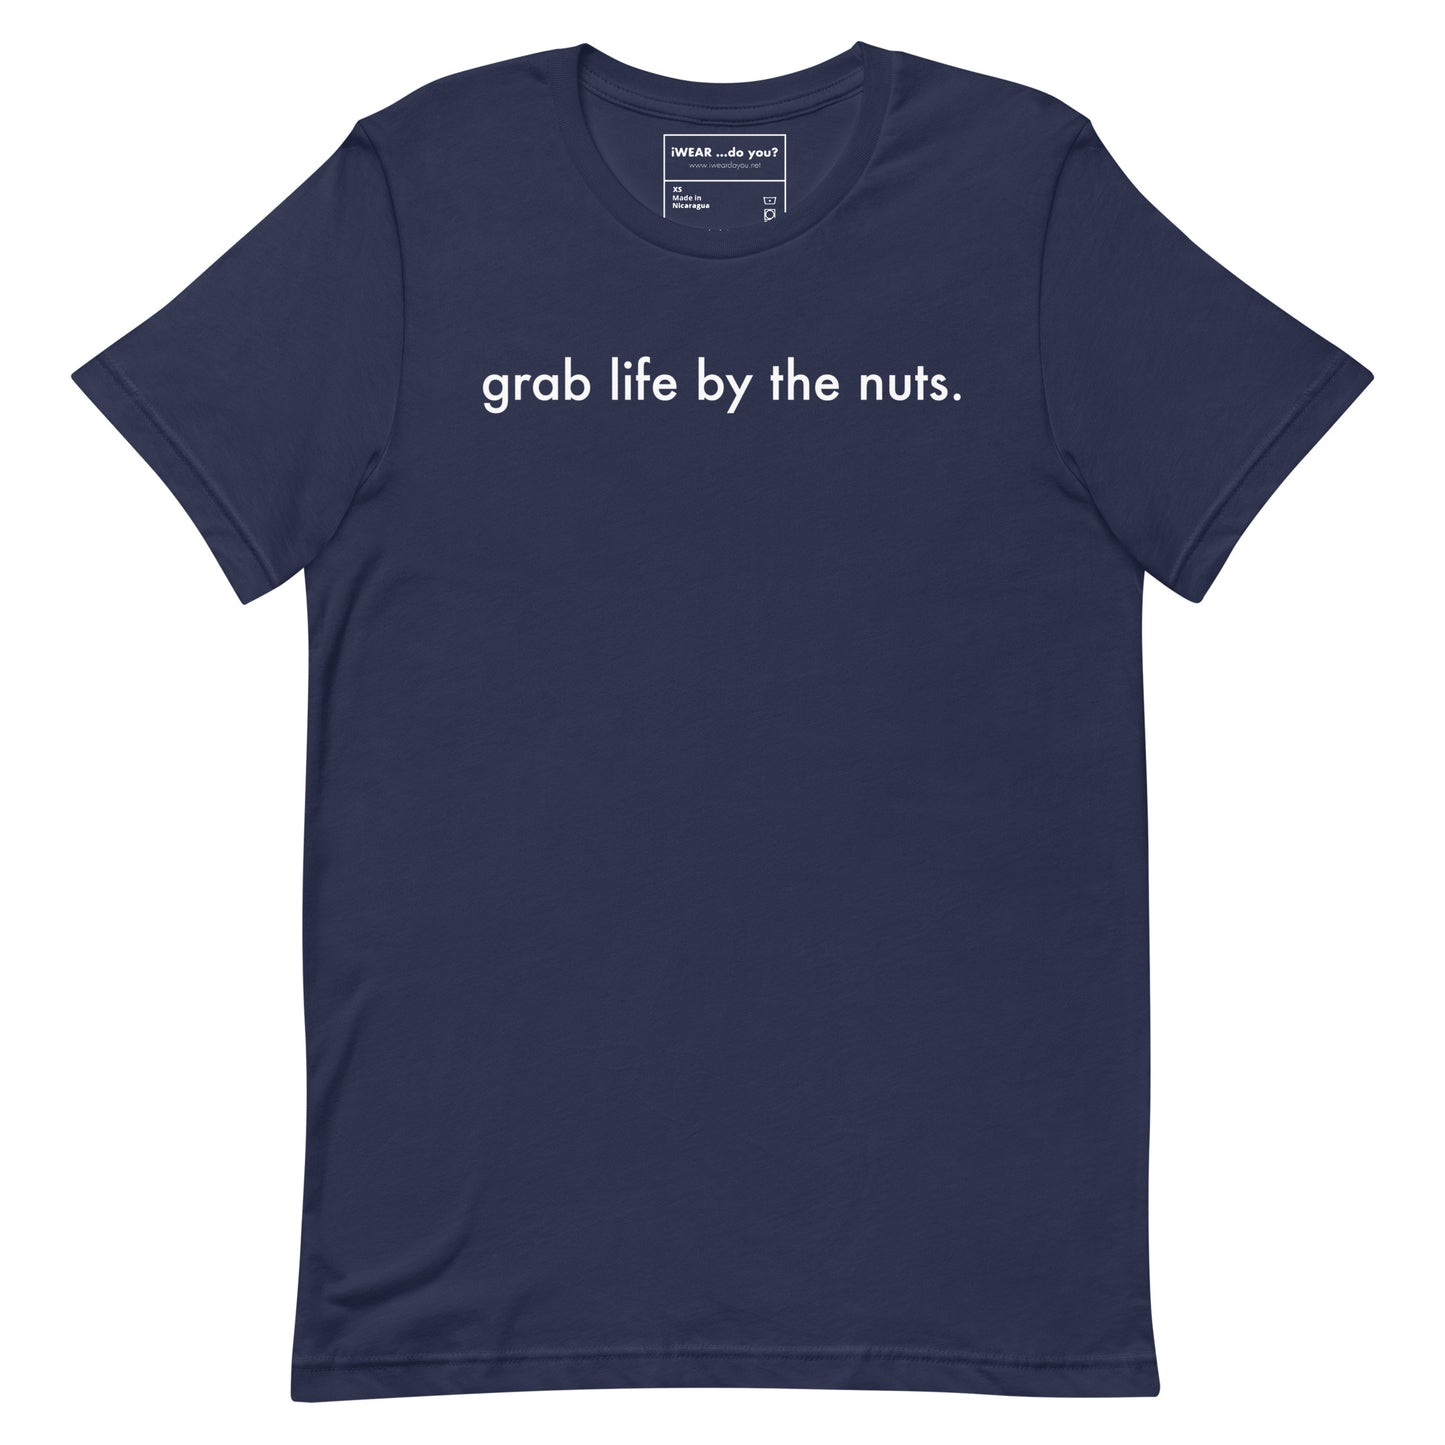 grab life by the nuts. tee